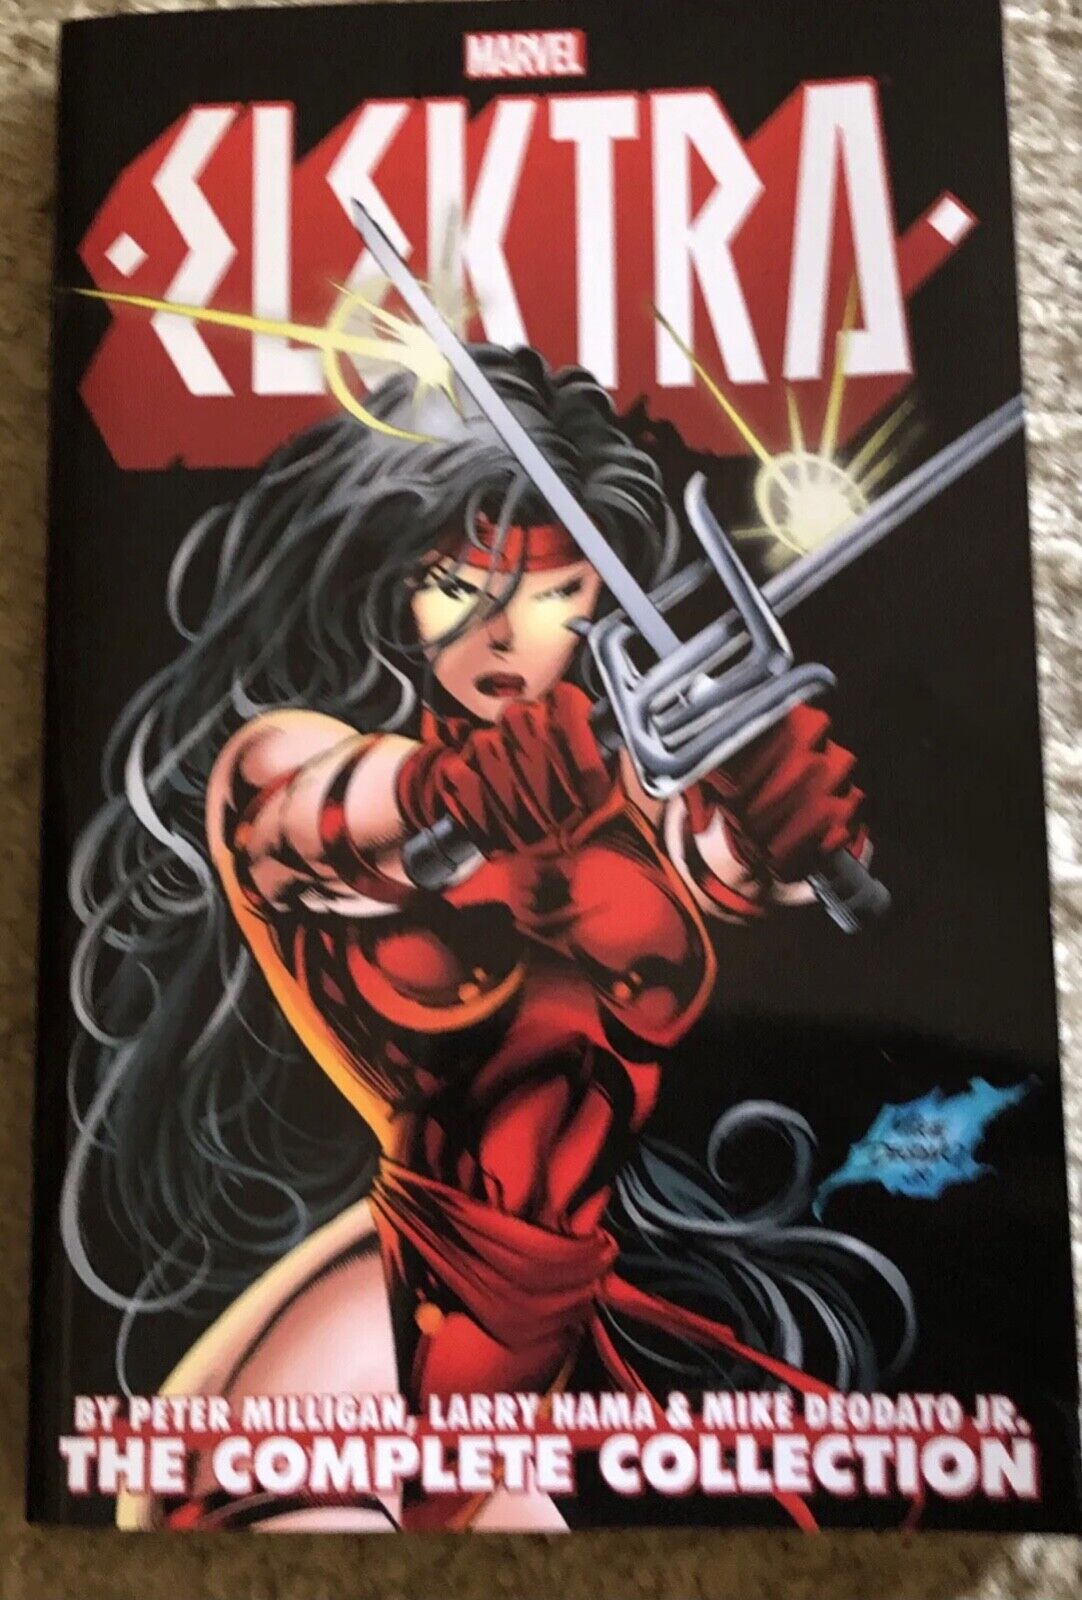 Elektra Complete Collection by Peter Milligan Larry Hama Mike Deodato Jr. TPB